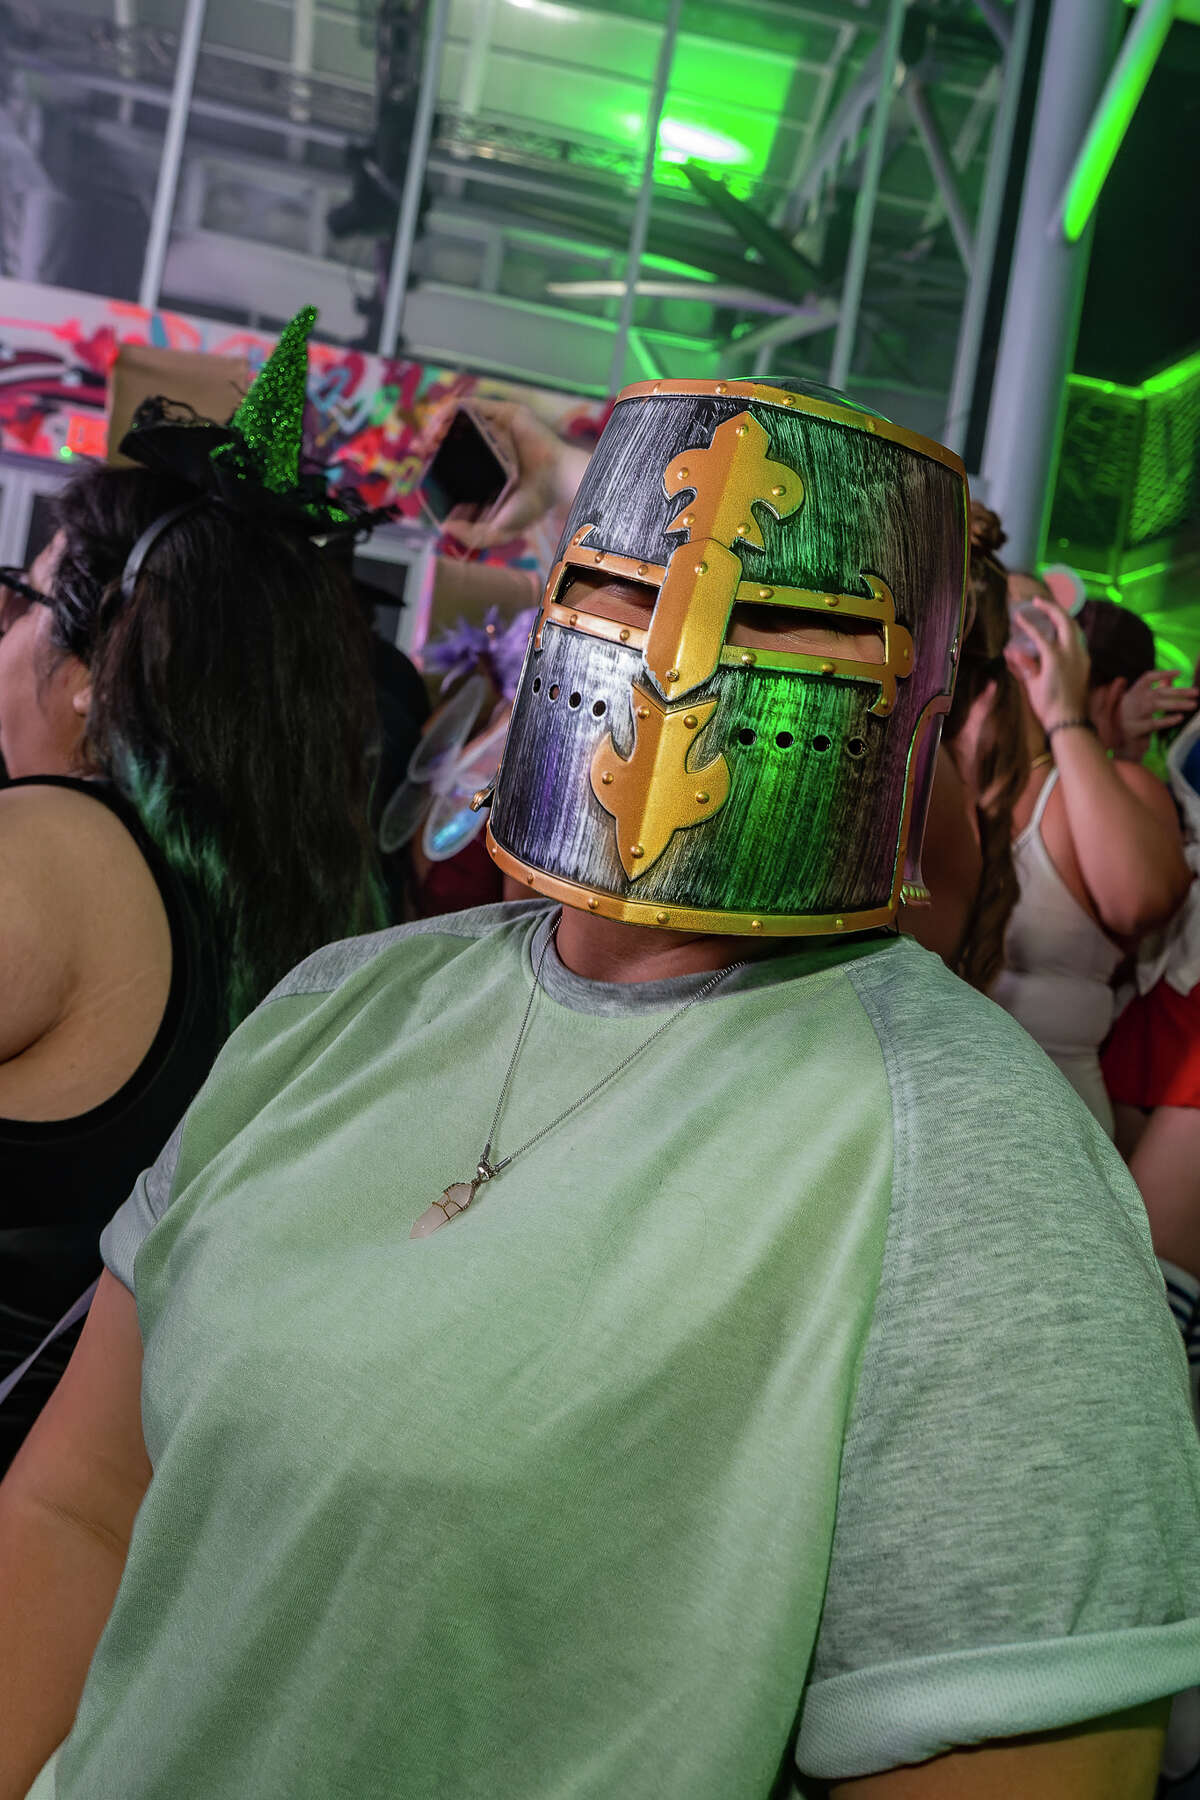 Rise Rooftop hosted a 'Shrek'-themed rave on Oct. 1 in Houston.